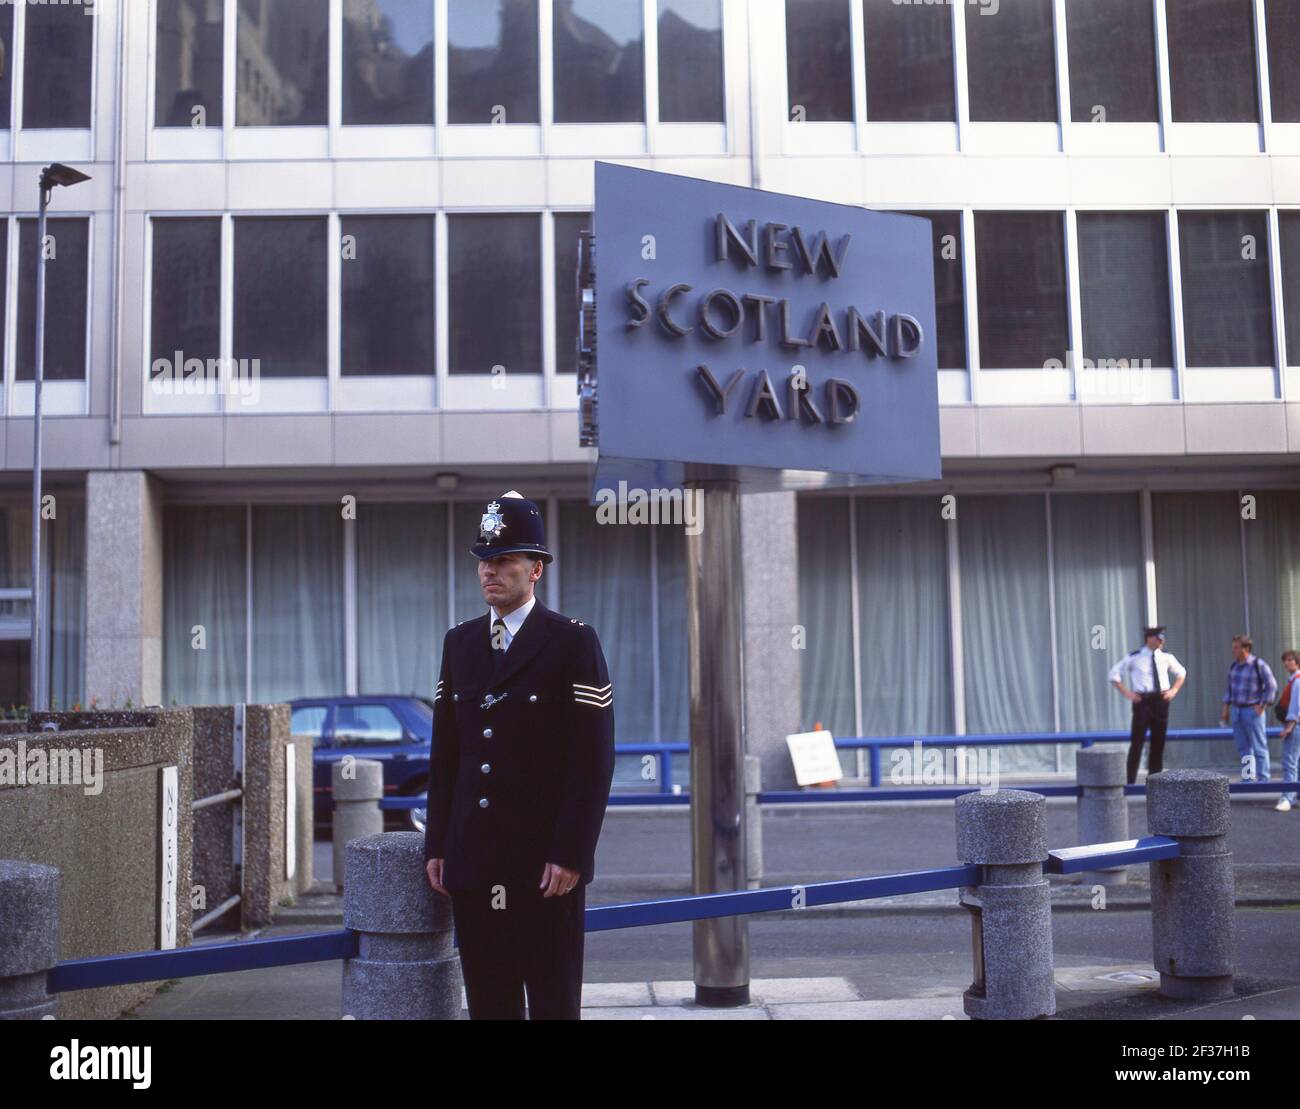 Policeman by New Scotland Yard sign, Broadway, Westminster, City of Westminster, Greater London, England, United Kingdom Stock Photo